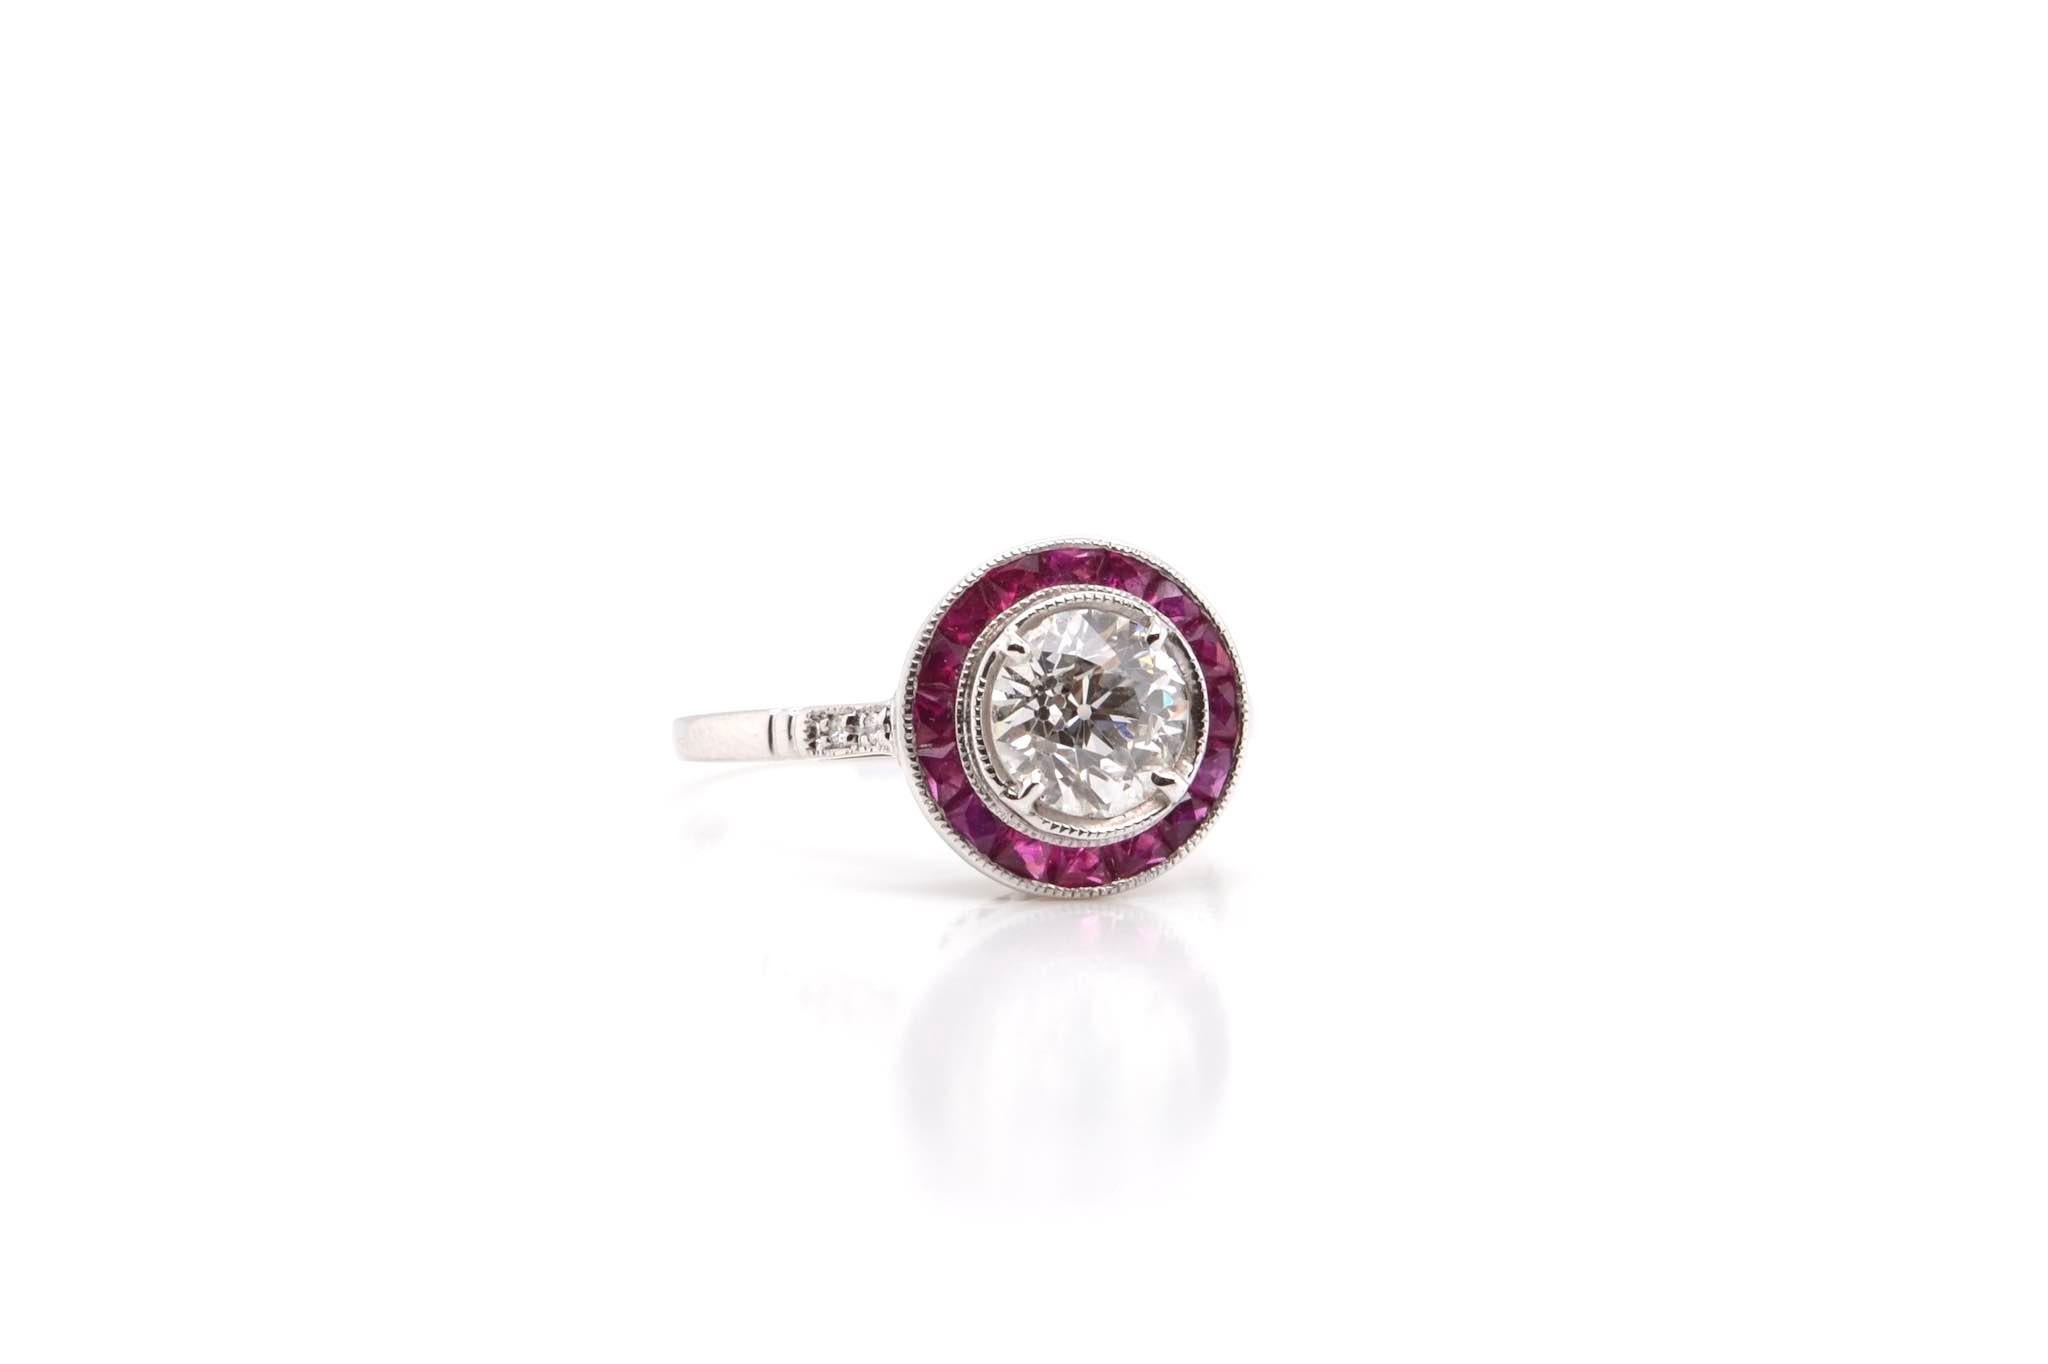 Stones: 0.93 carat H/Si2 diamond and calibrated rubies
for a total weight of 0.74 carats
Material: 18k white gold
Dimensions: 11mm in diameter
Weight: 2.7g
Size: 52.5 (free sizing)
-Laboratory certificate
Certificate
Ref. : 22342 / 22453